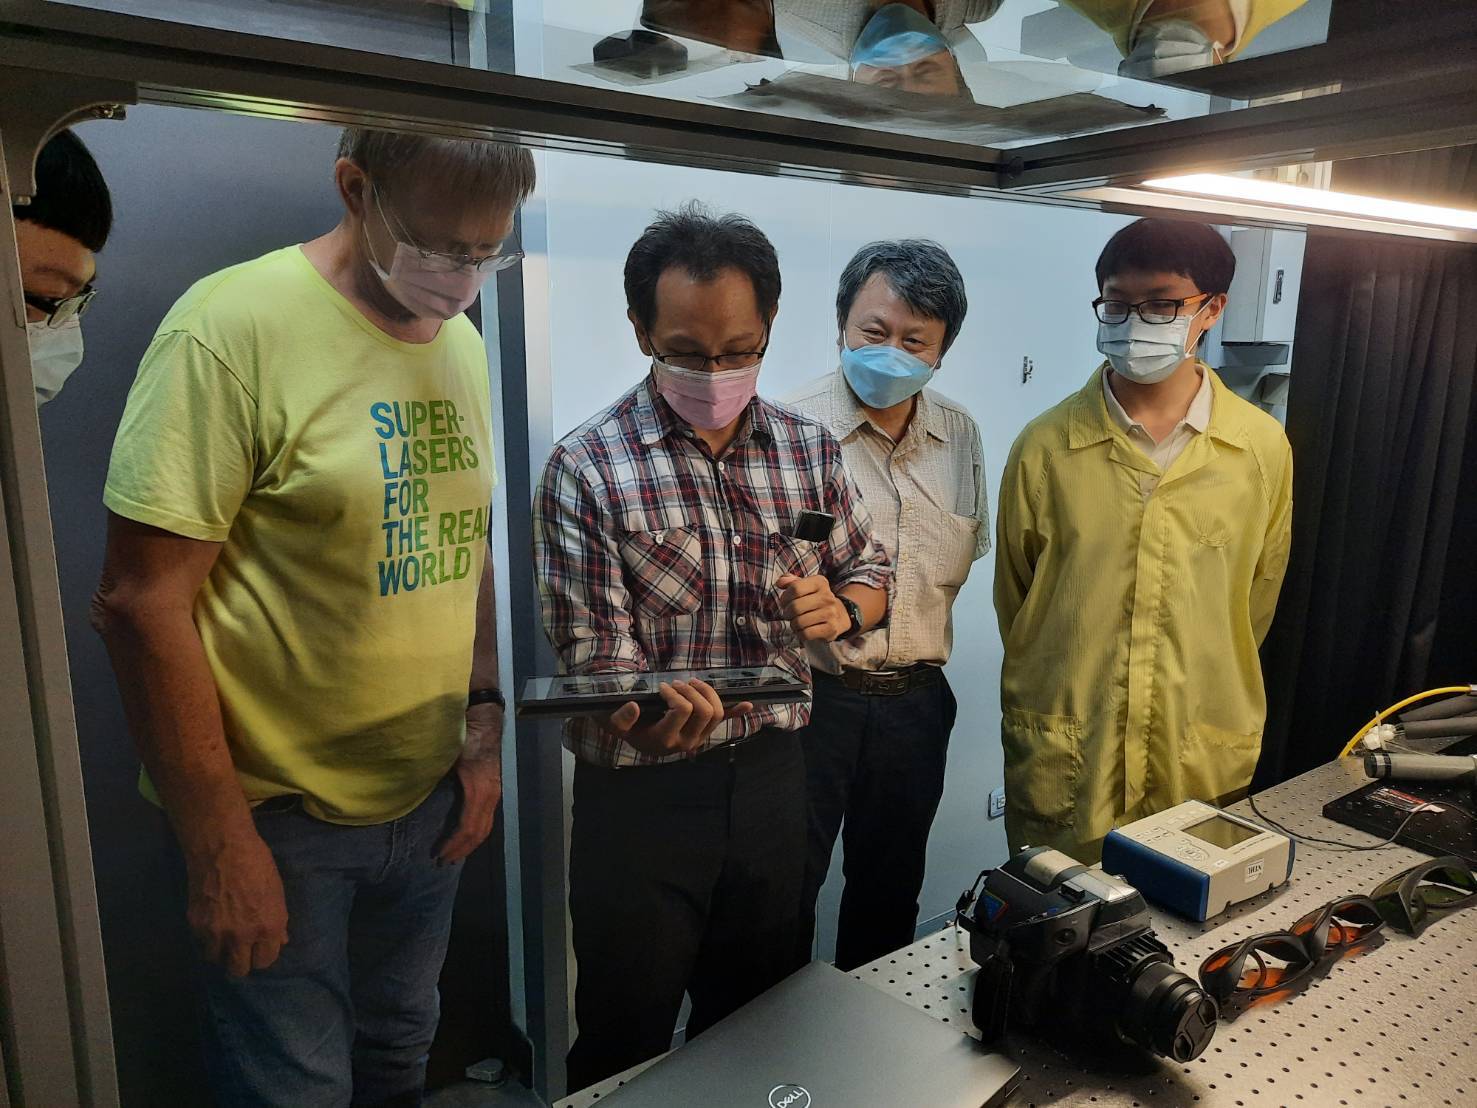 Dr. Račiucaitis visited the related experiments on "optical angular momentum (OAM)" of associate professor Yuan-Yao Lin in the Department of Photonics (second from the left) and "High-speed characterization in silicon photonics and photonics integration" of Associate Dean Yi-Jen Chiu in the College of Engineering (third from the left).